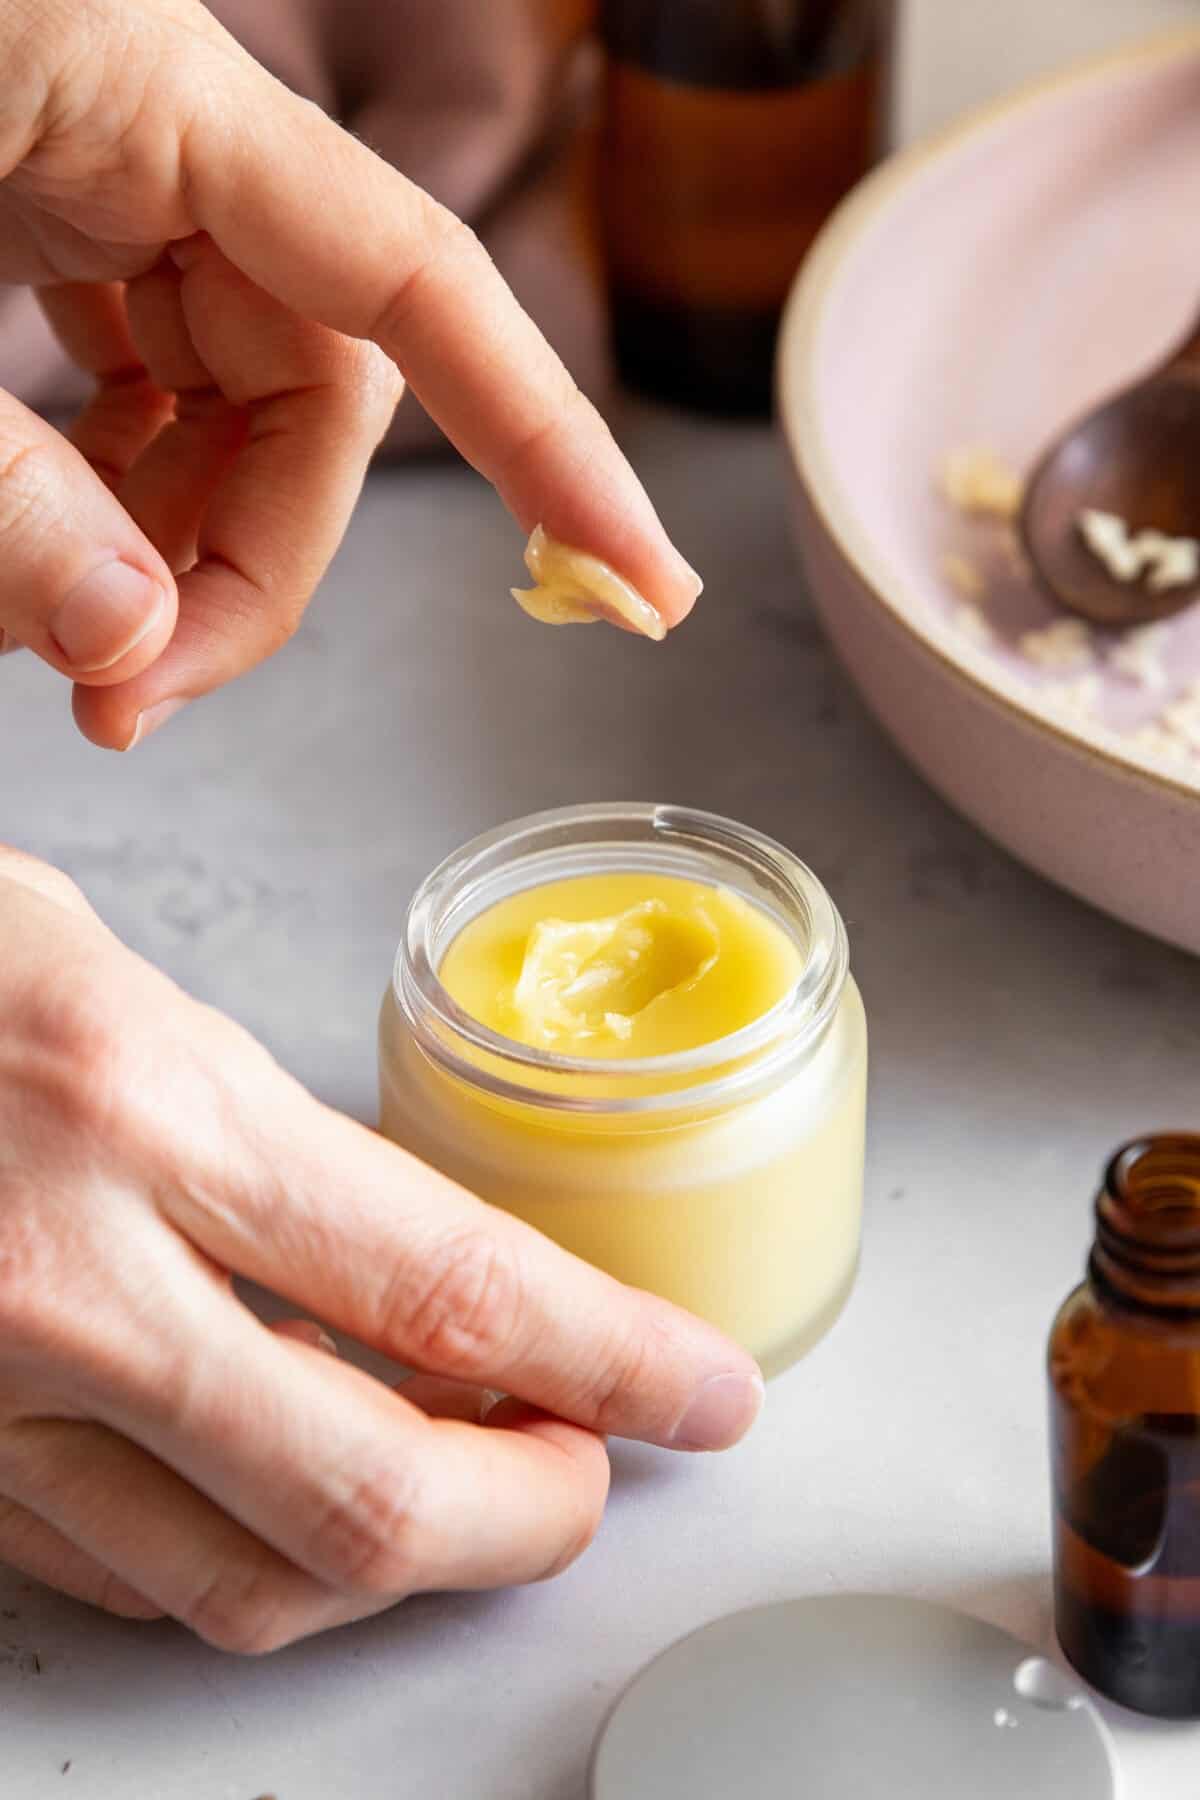 Let Homemade Nail Balm Recipe Cool Before Applying